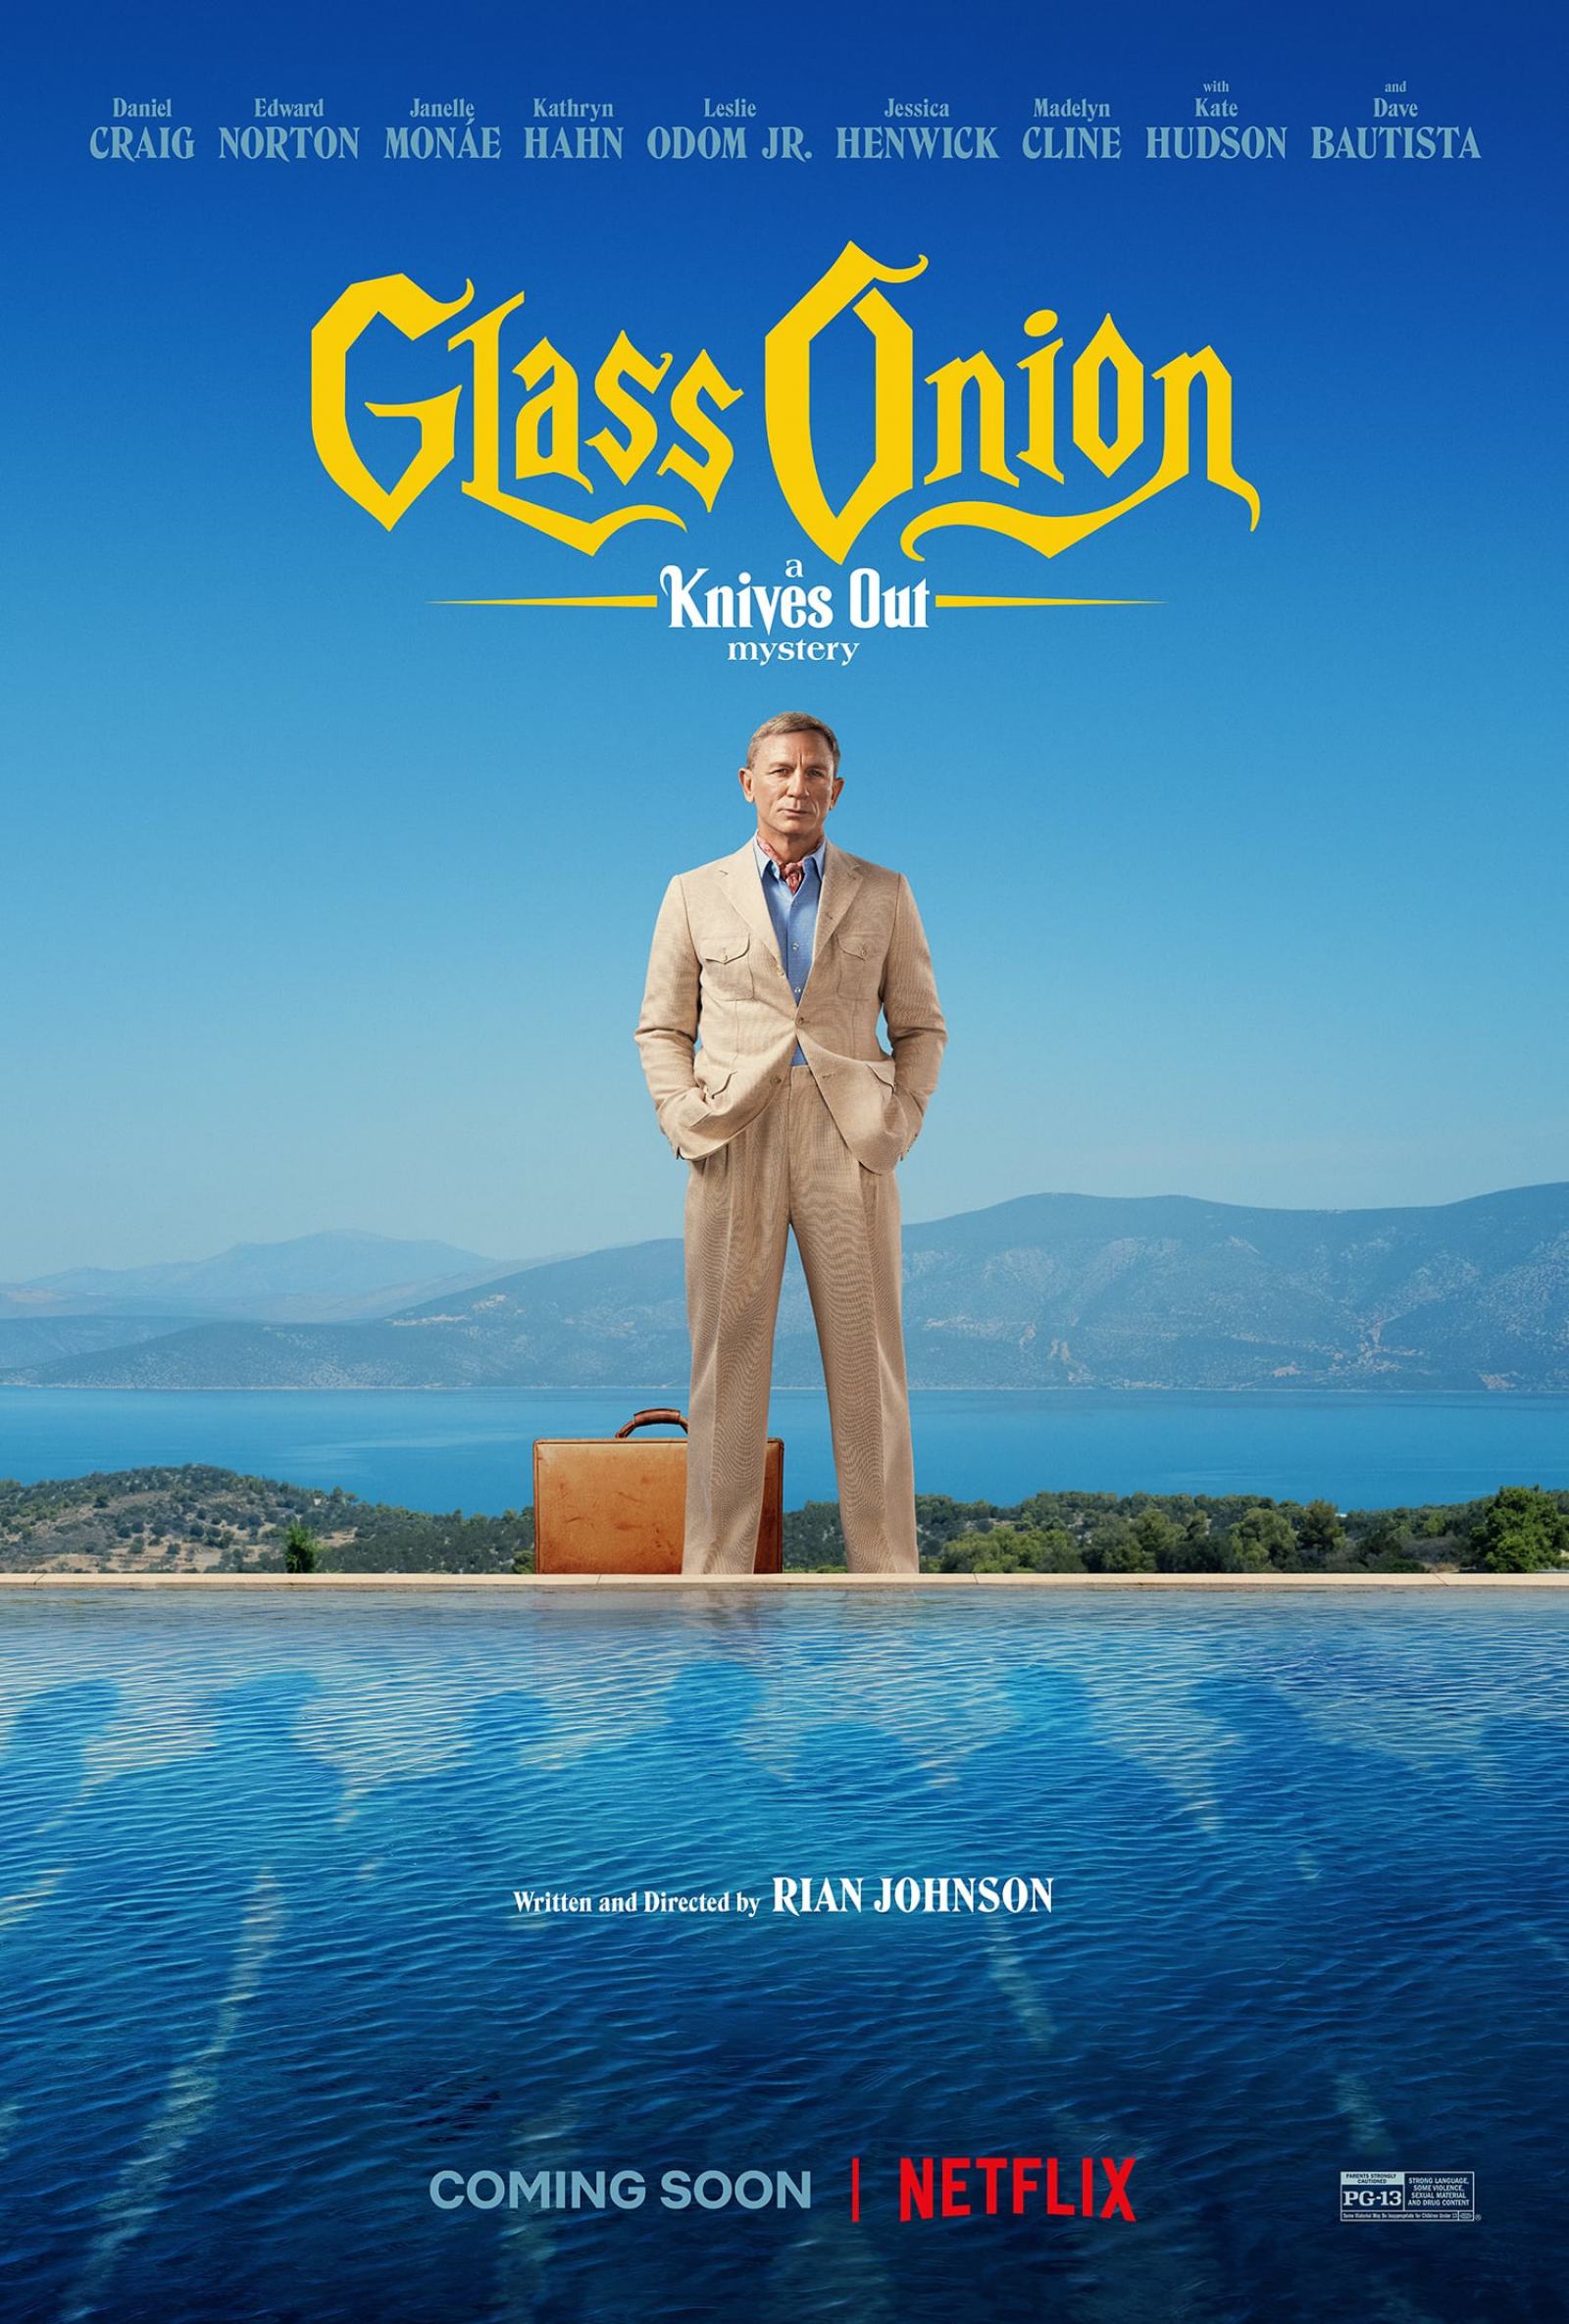 Glass Onion : Knives Out Mystery Film Review and Trailer